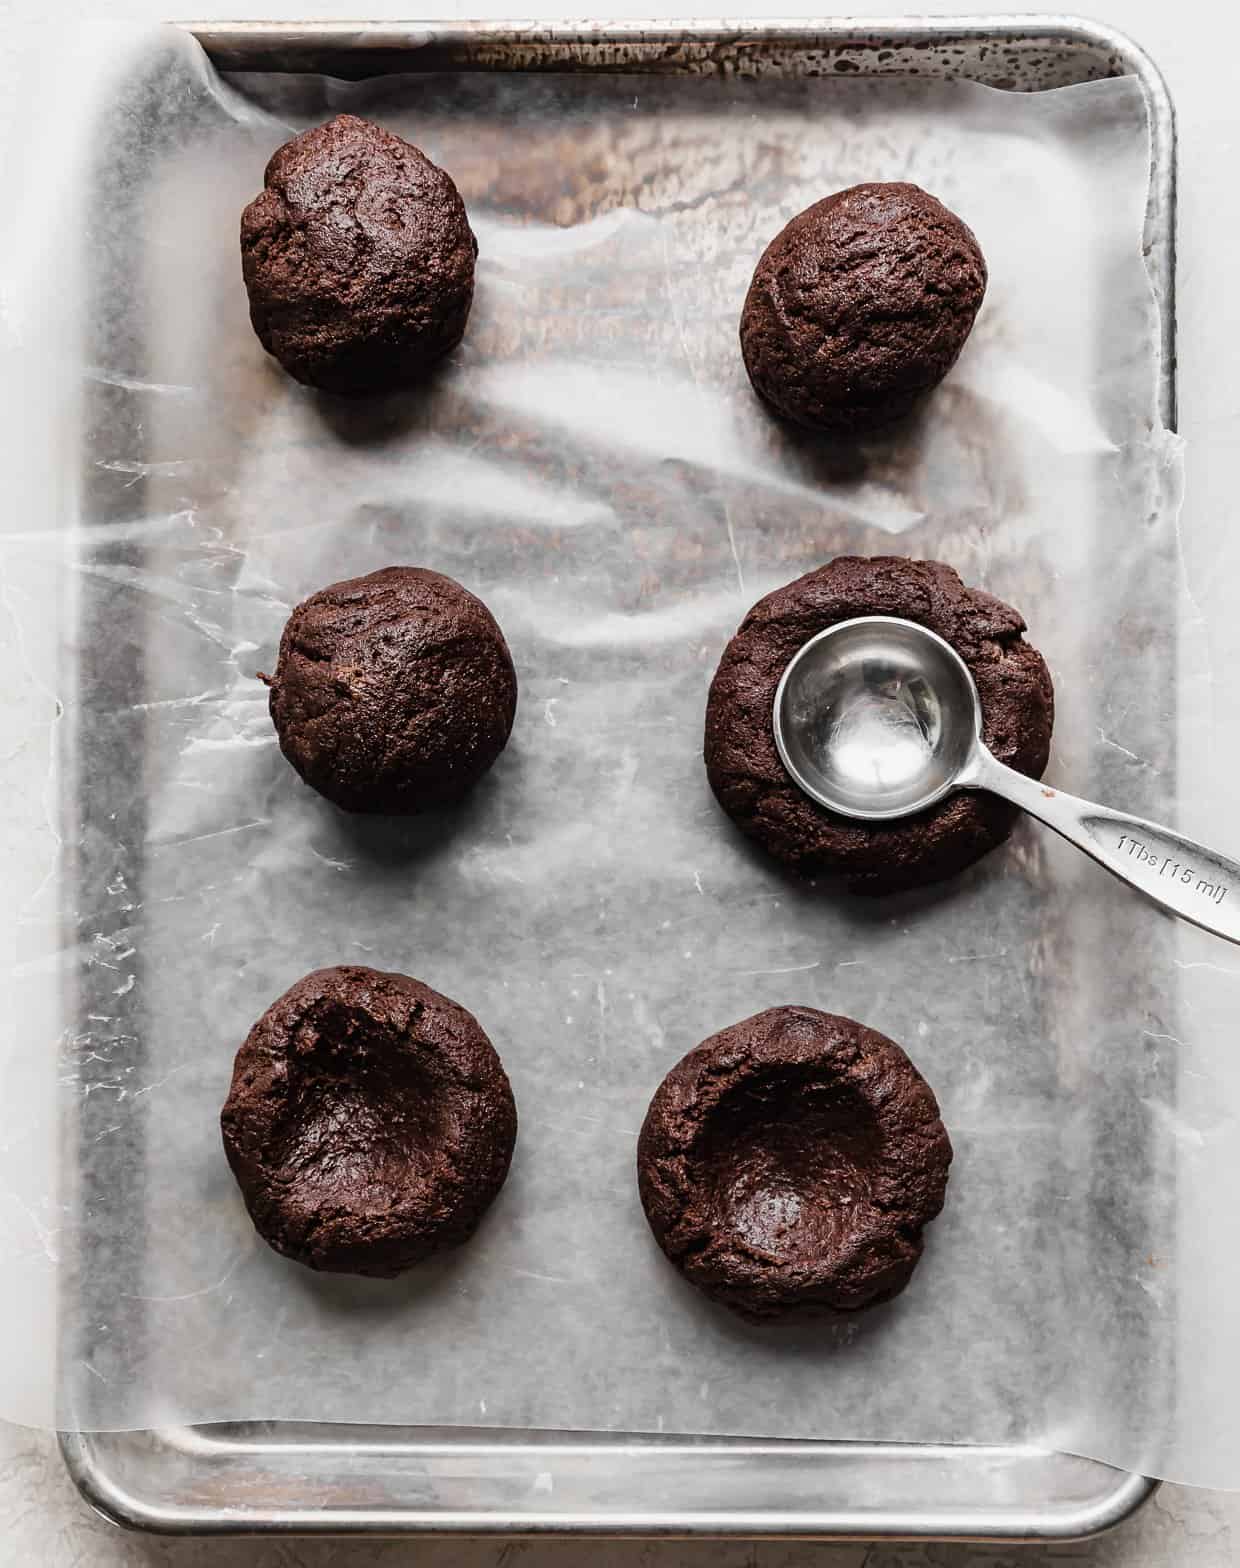 Six chocolate cookie dough balls with a metal tablespoon pressing into the center of one of the balls to create an indentation.